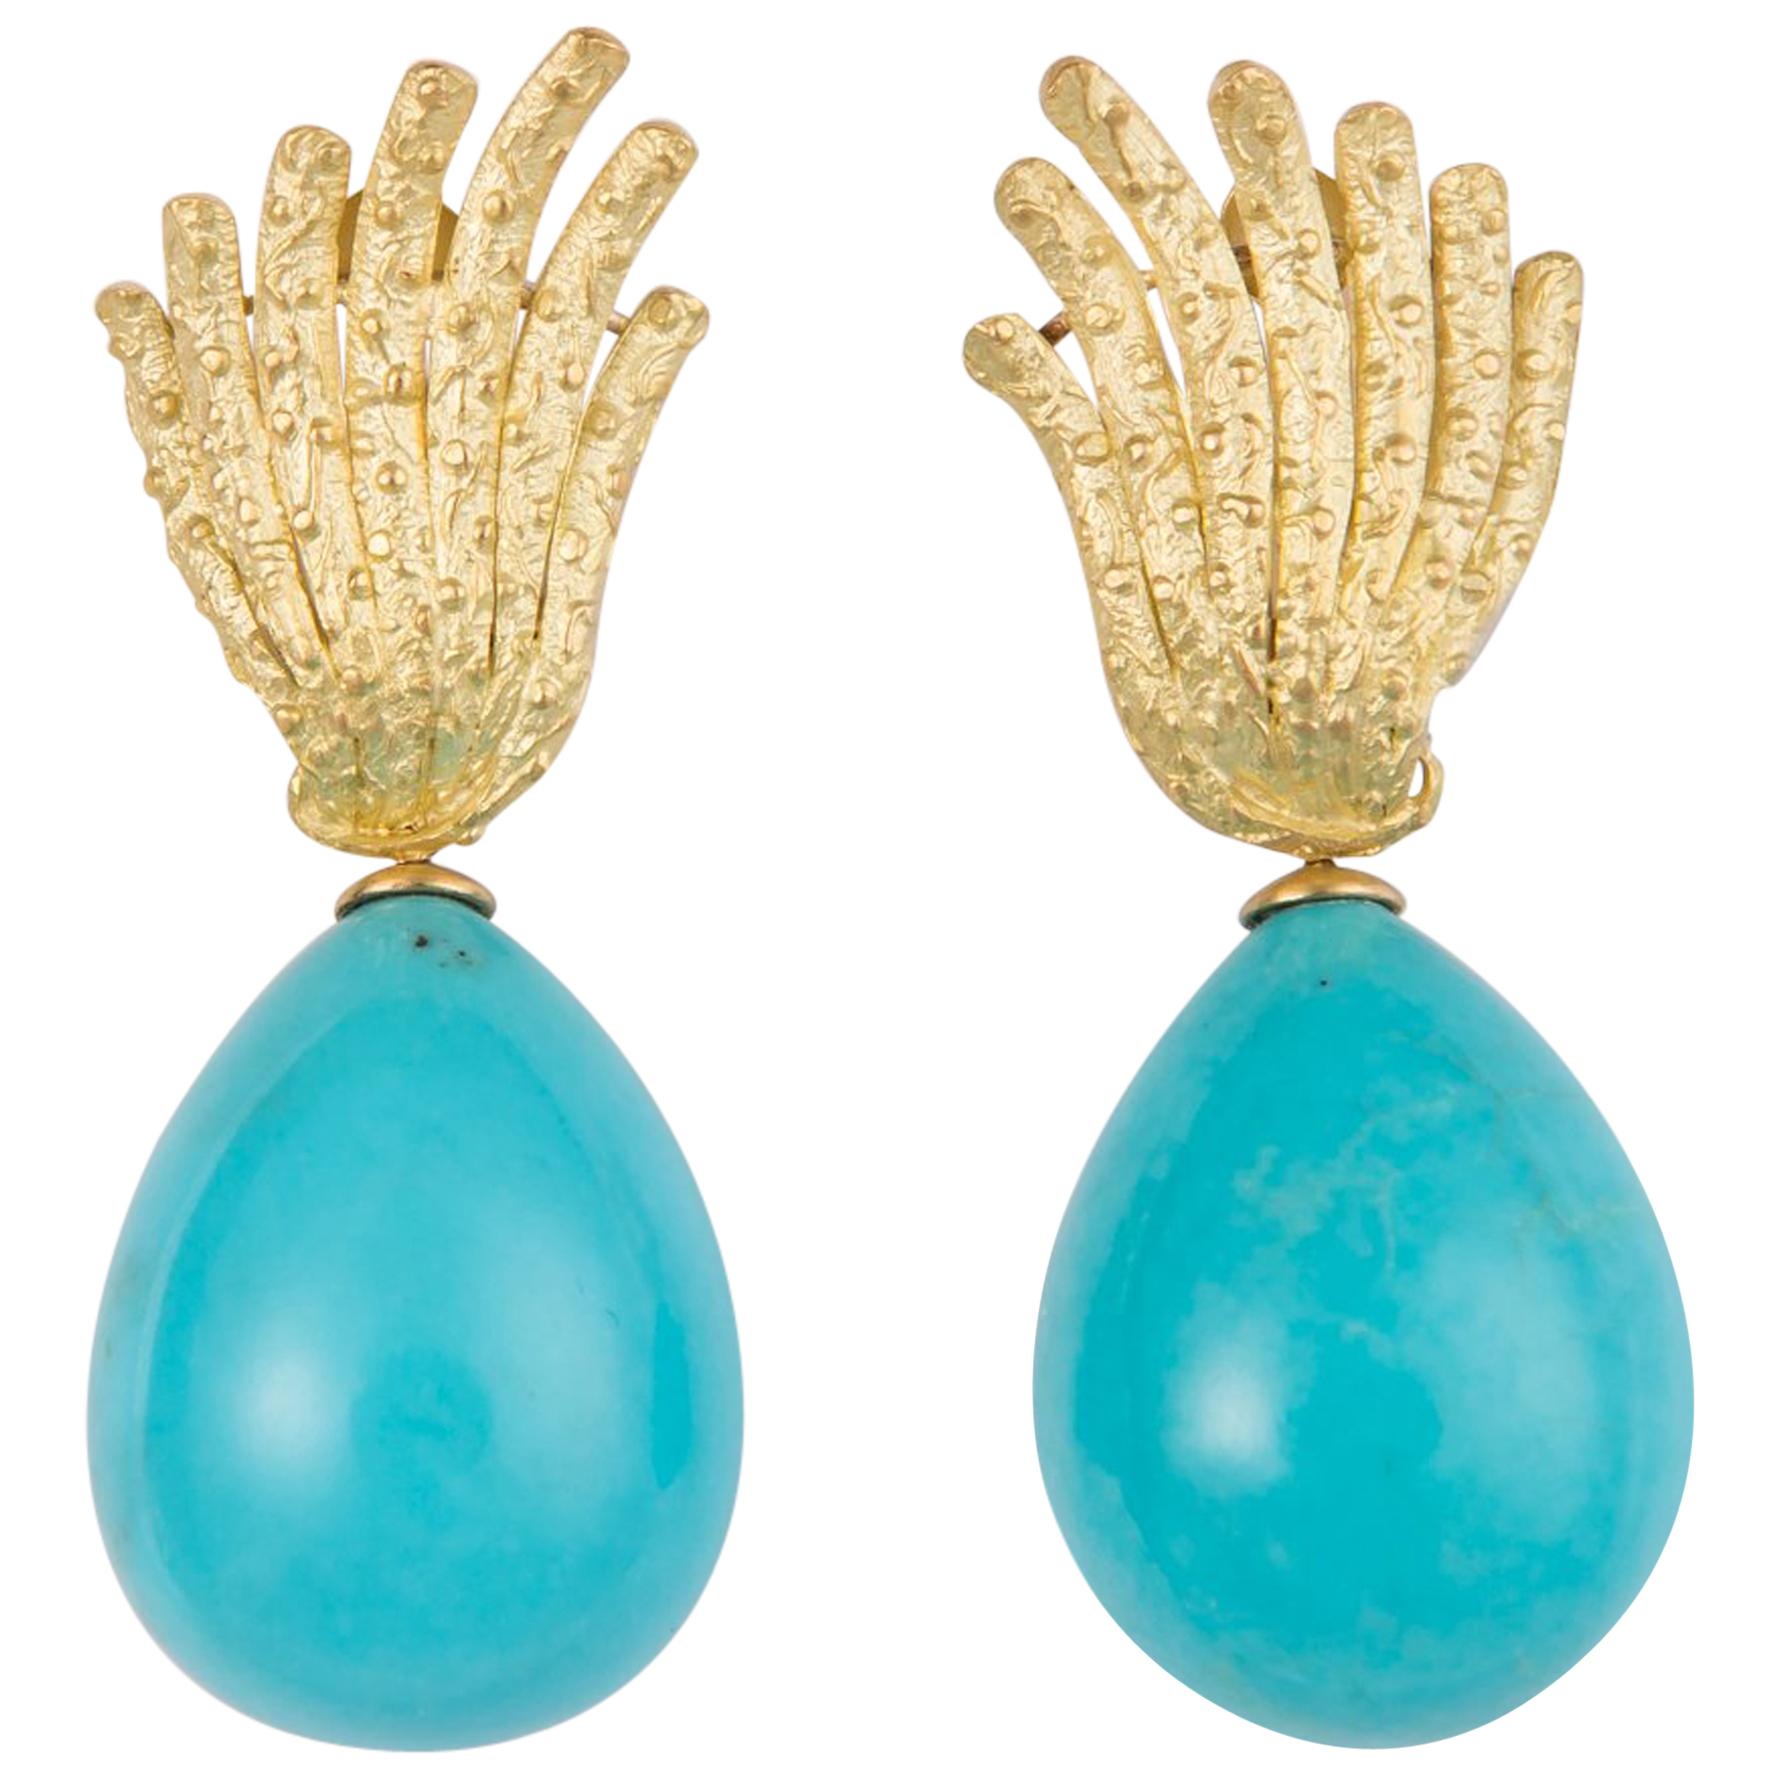 Tiffany & Co. Gold and Turquoise Drop Earrings